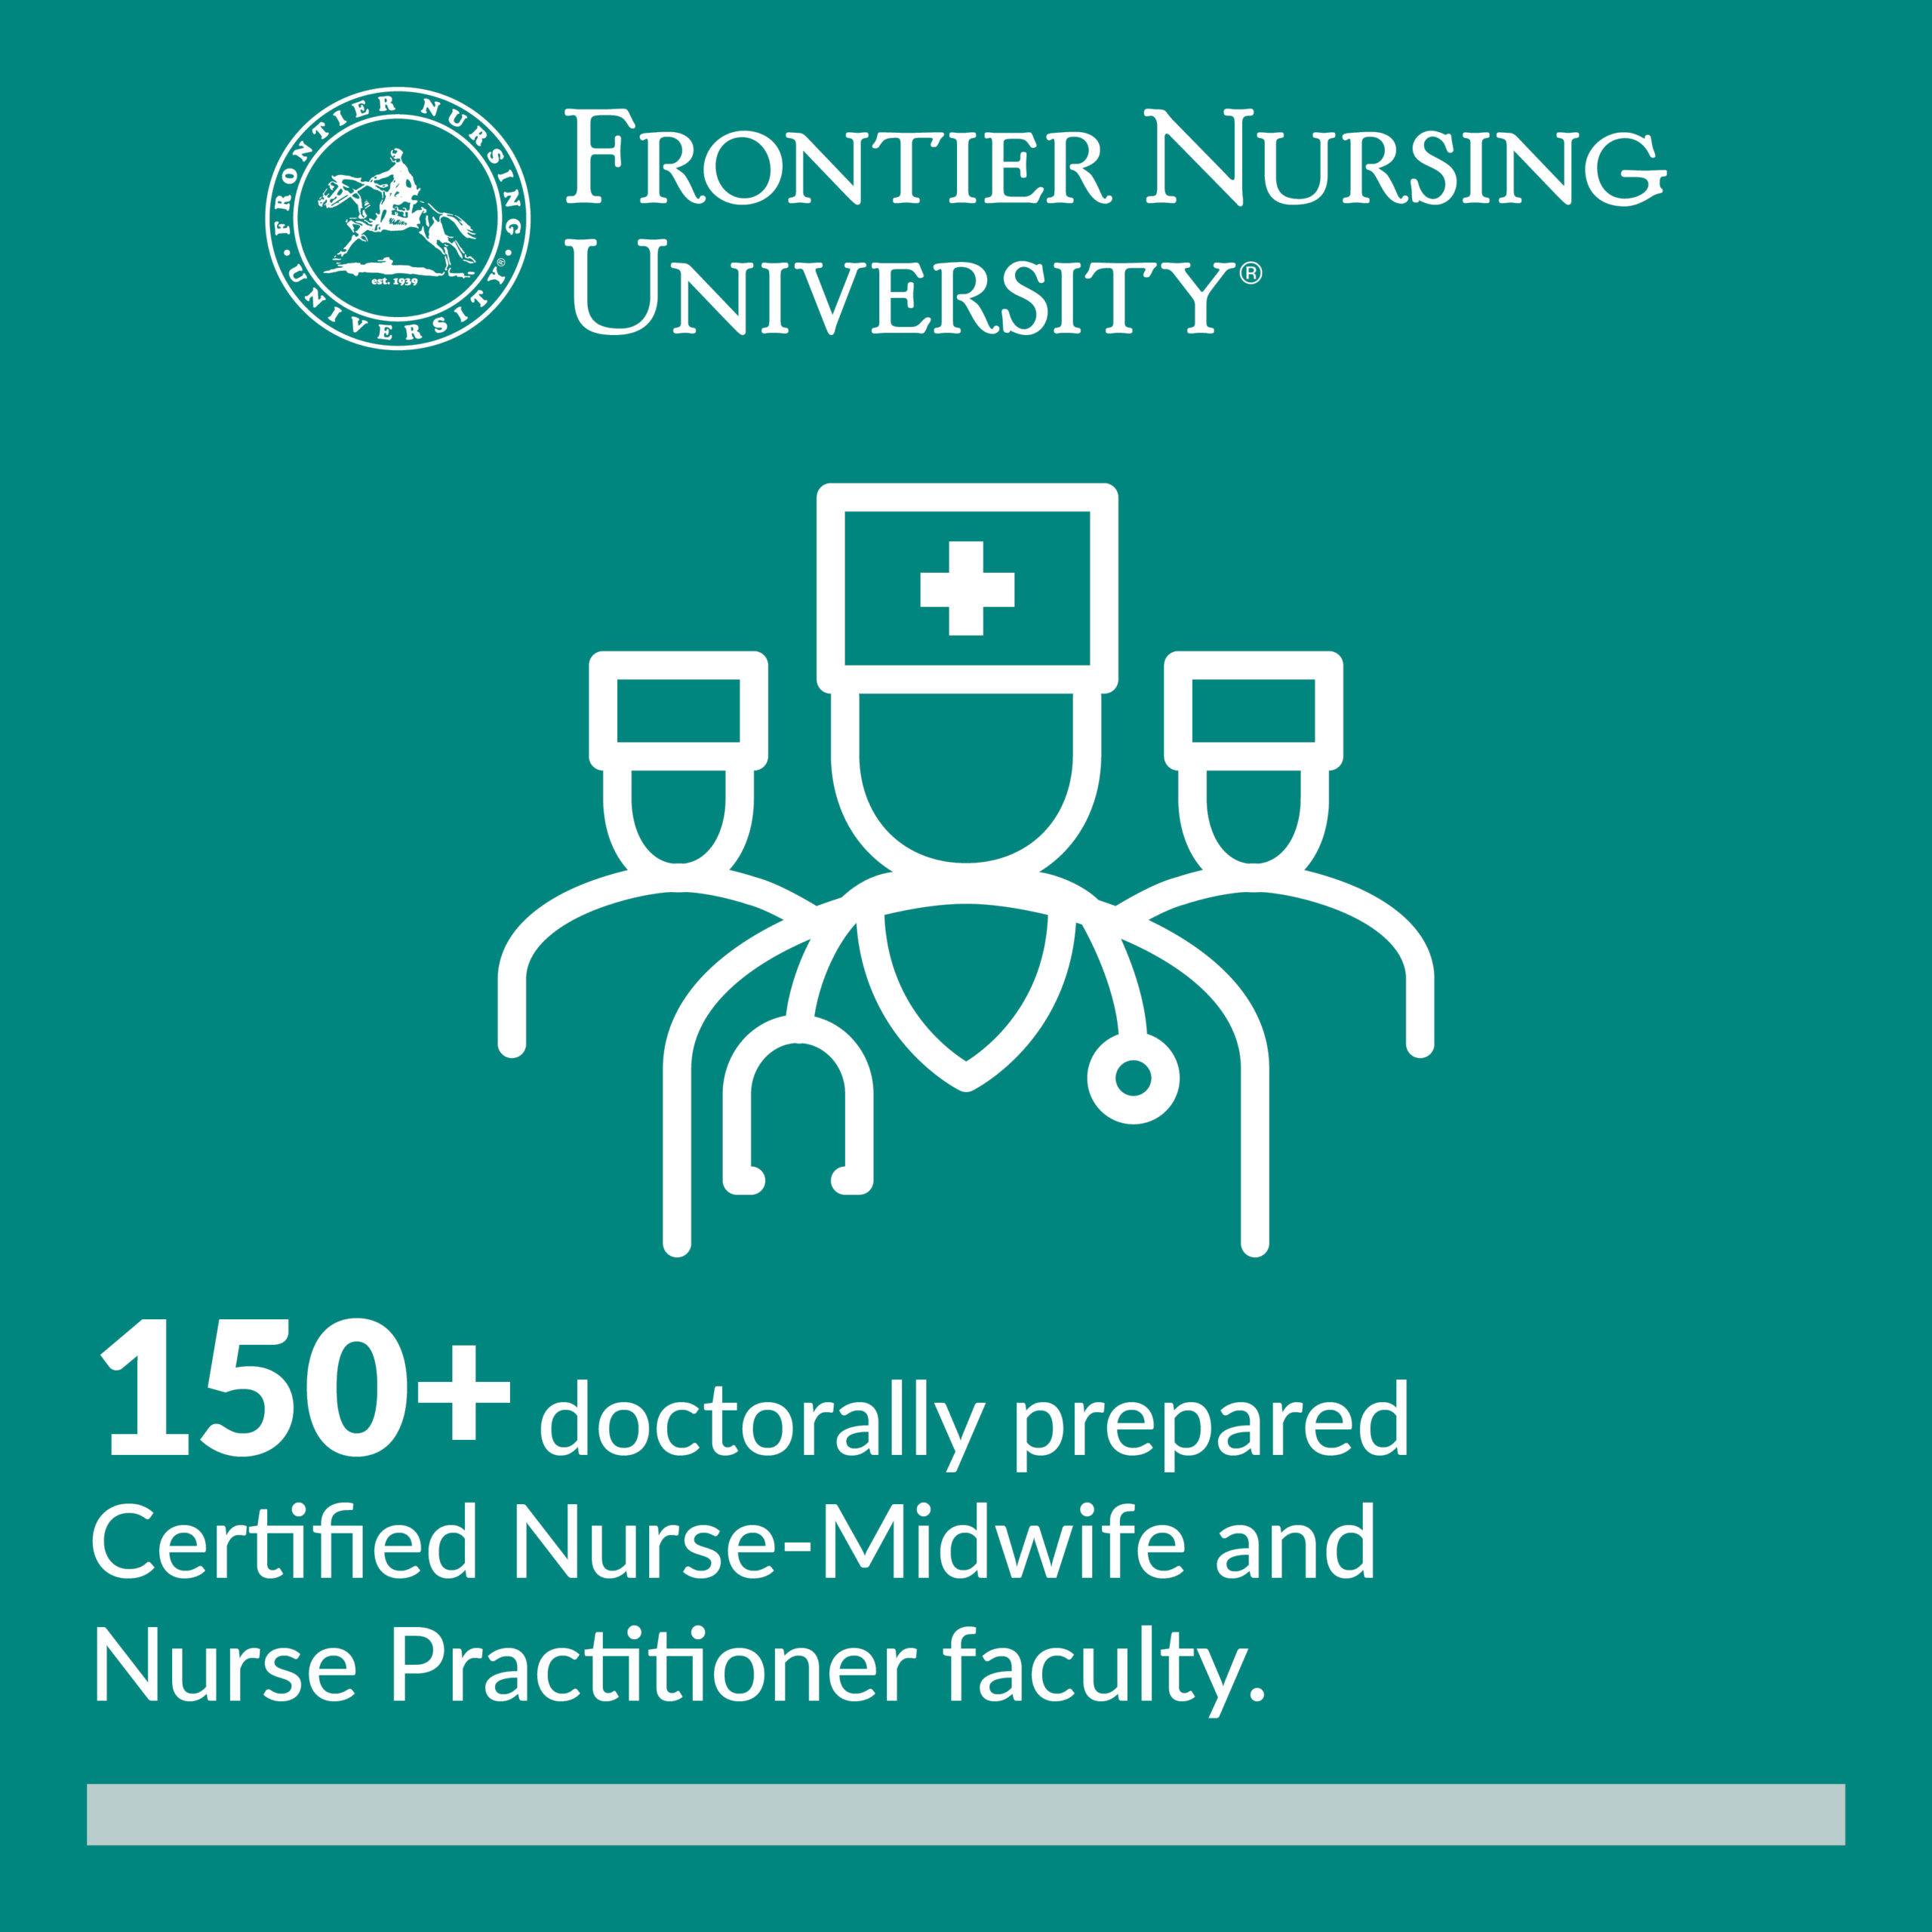 150+ doctorally prepared Certified Nurse-Midwife and Nurse Practitioner faculty.